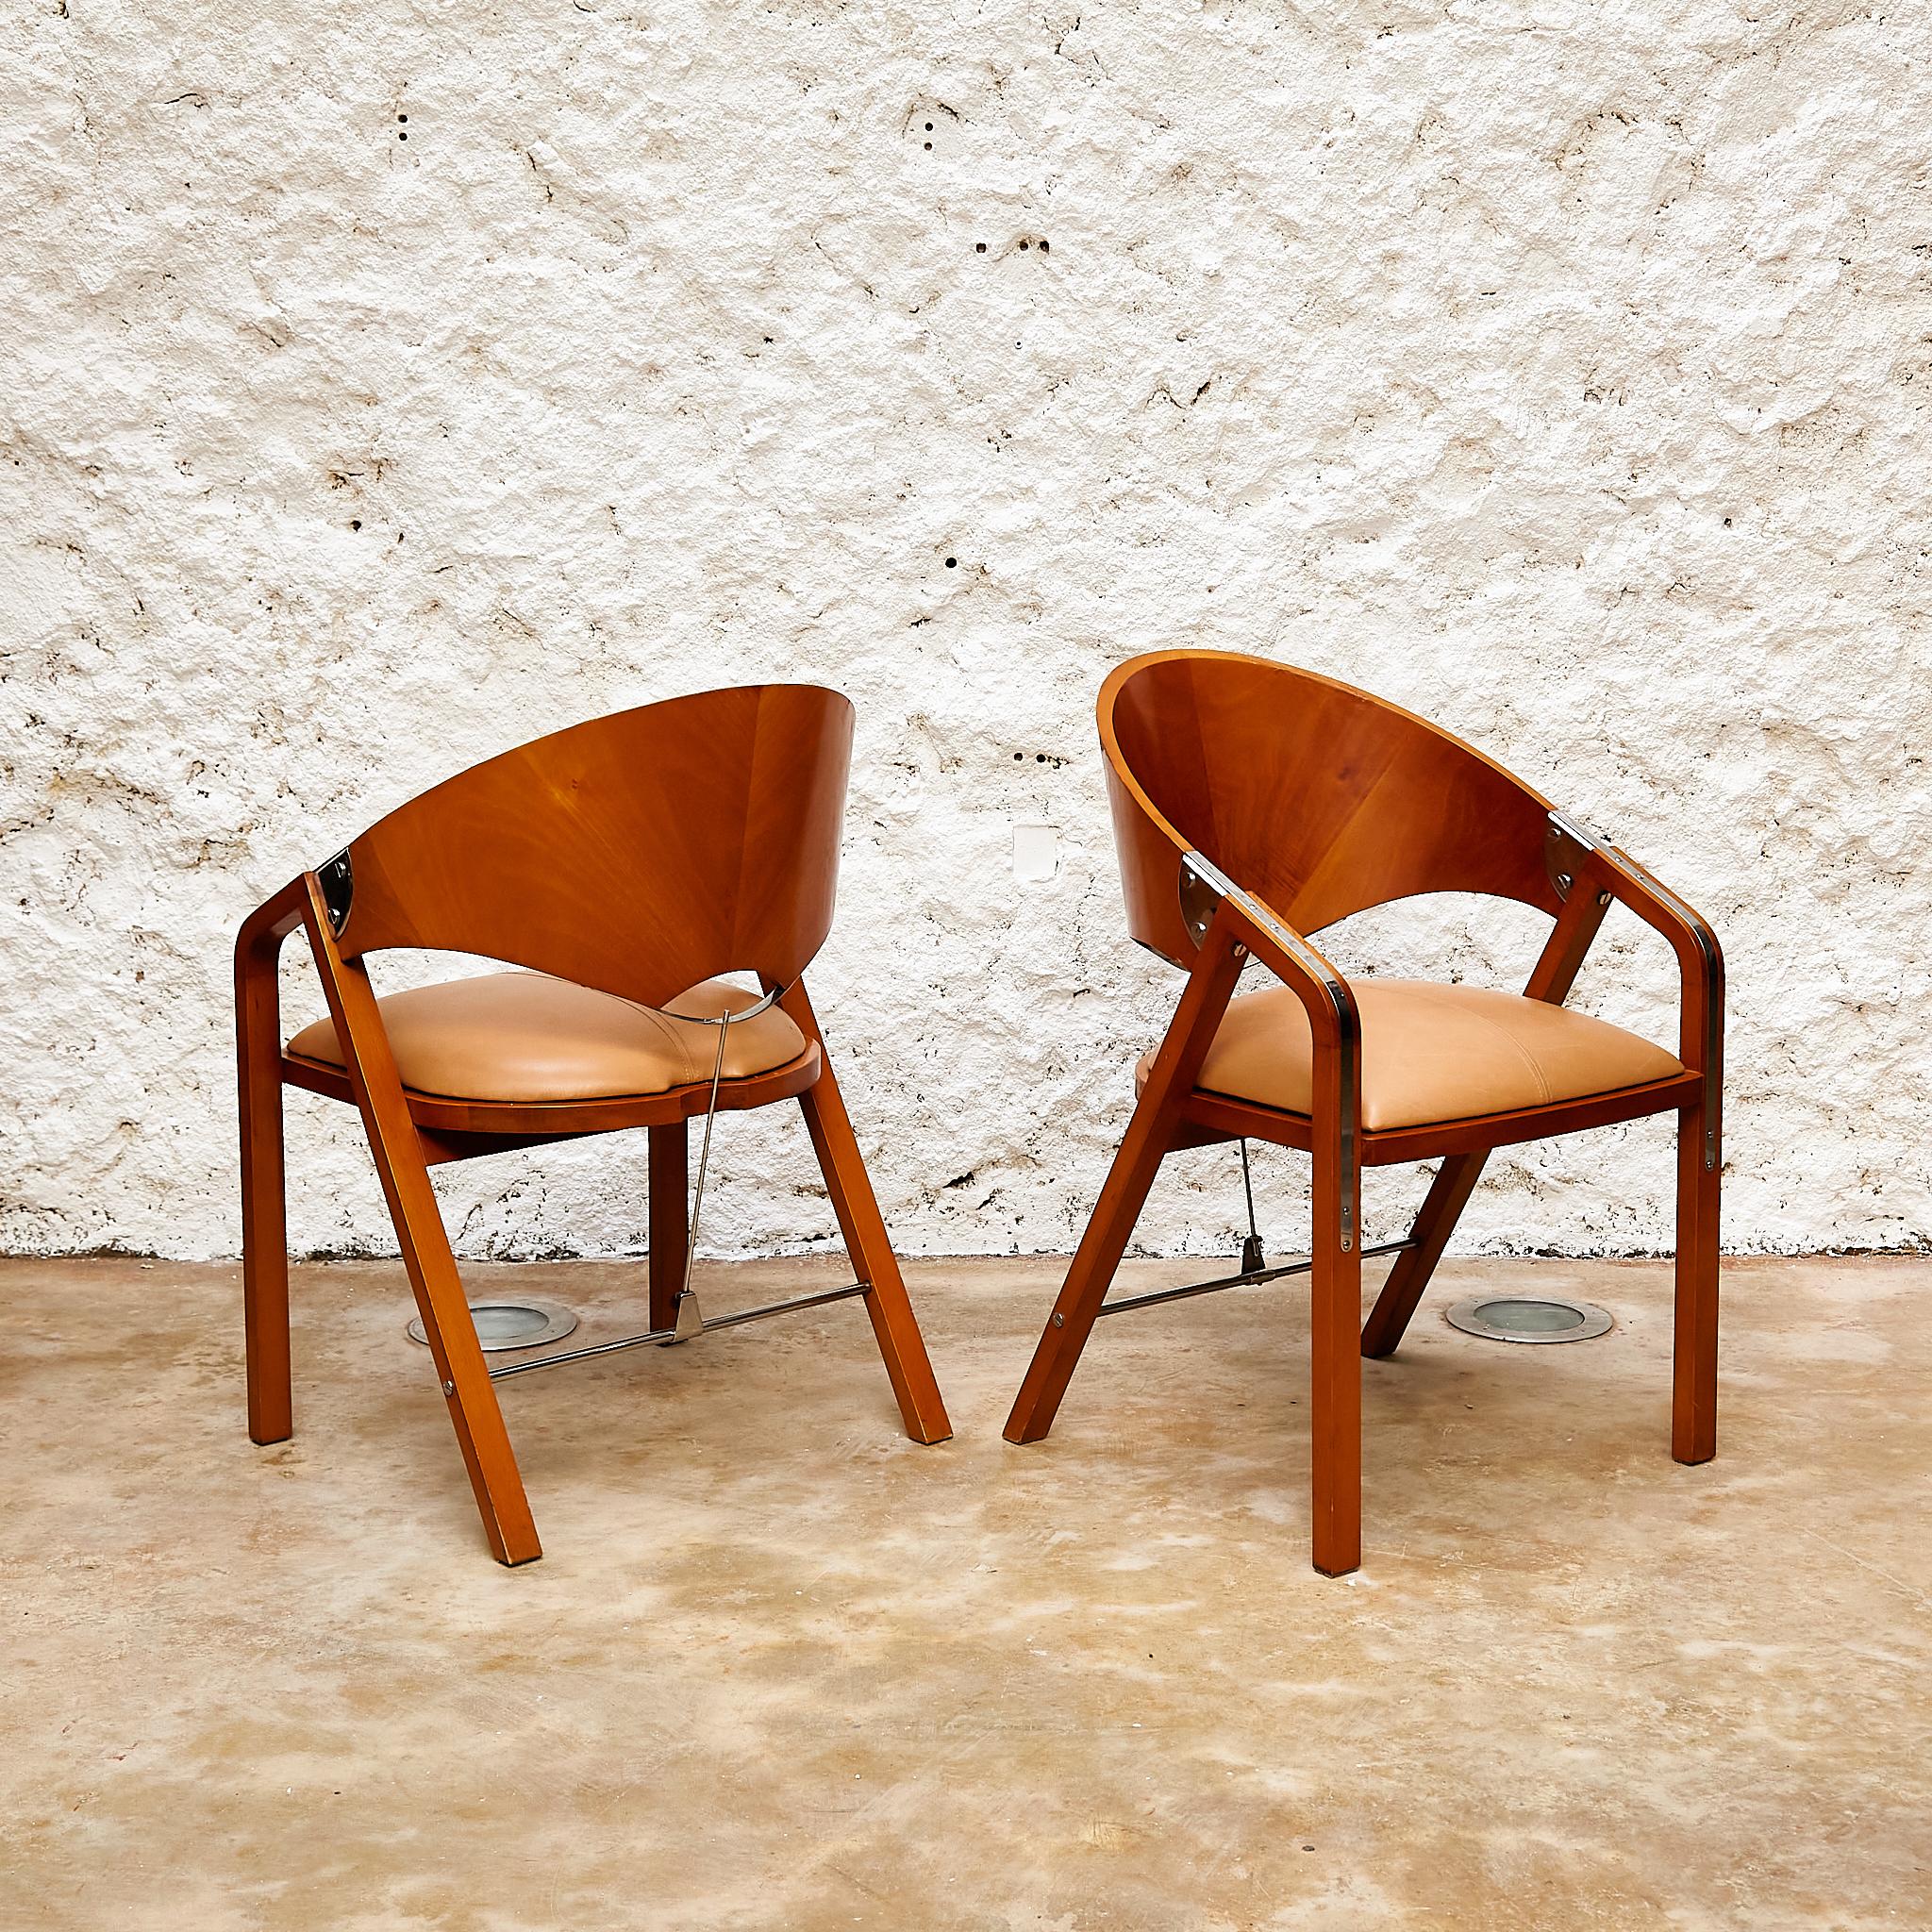 Mid-Century Modern The Vintage 'Spinnaker' Chairs by Jamie Tresserra - Wood, Metal and Leather For Sale